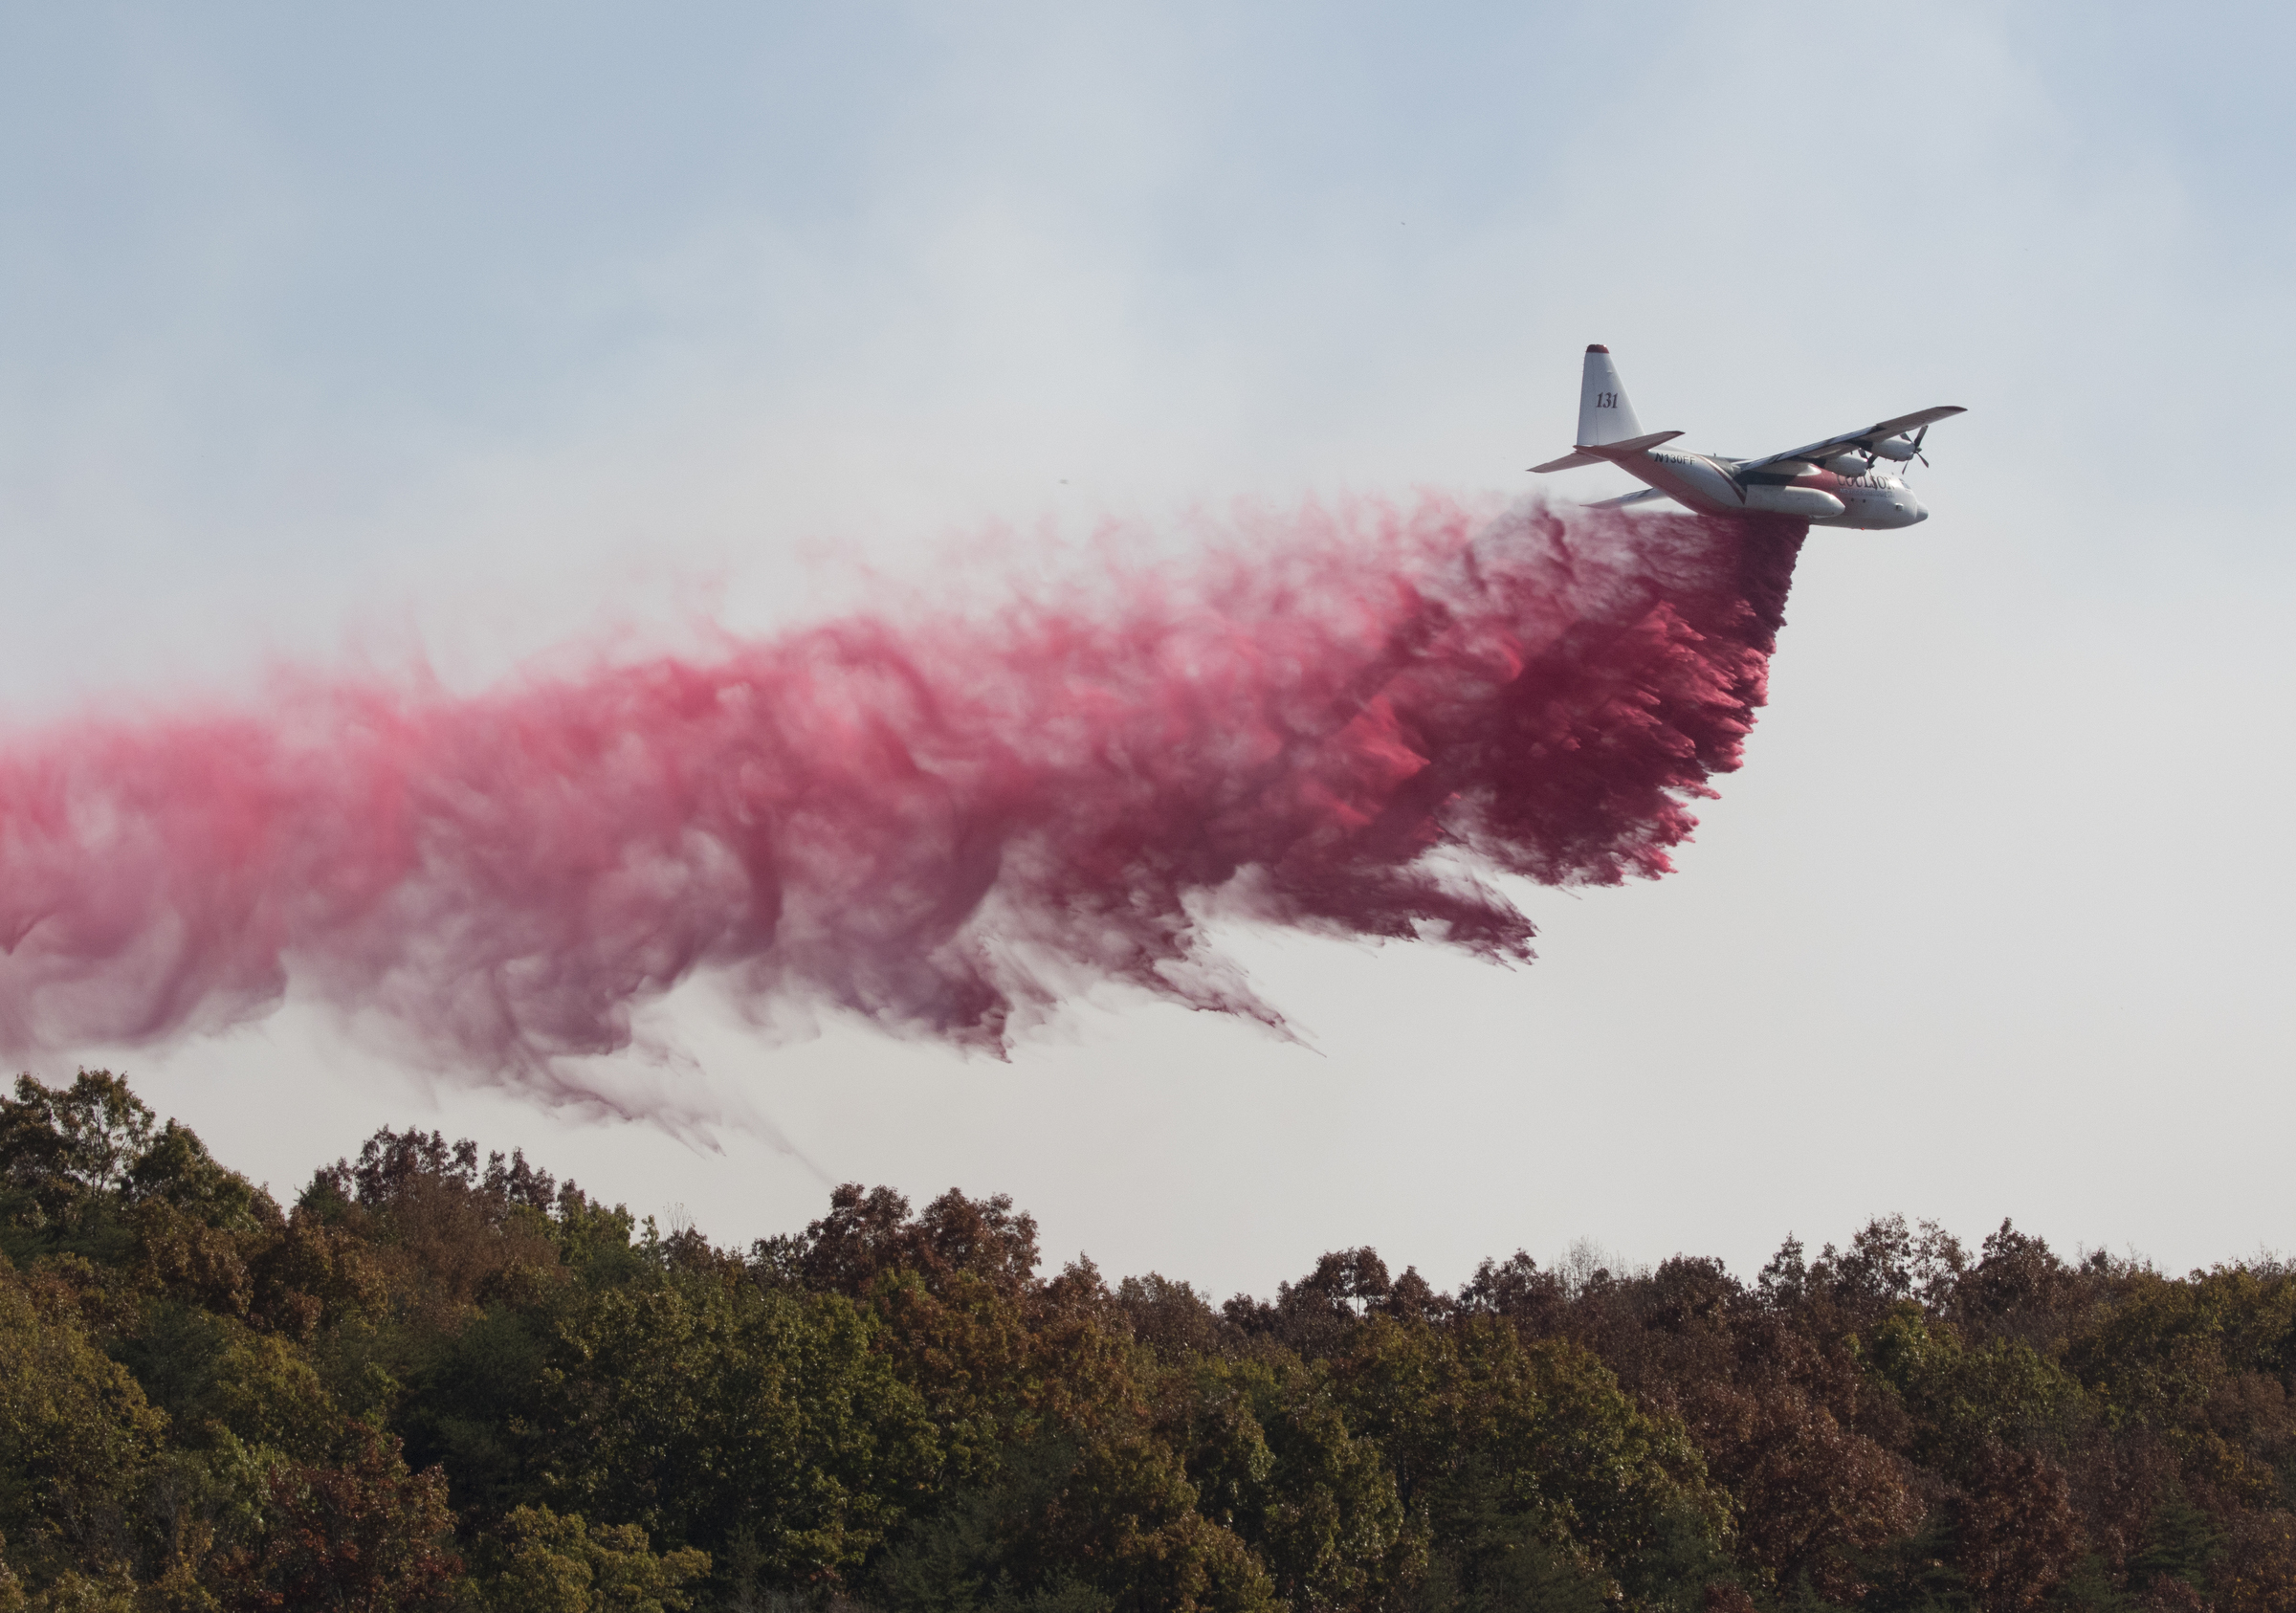 PHOTO: An aircraft from the US Forestry Service drops fire retardant on a wildfire burning along the Flipper Bend area of Signal Mountain in Hamilton County, Tennessee, Nov. 9, 2016.